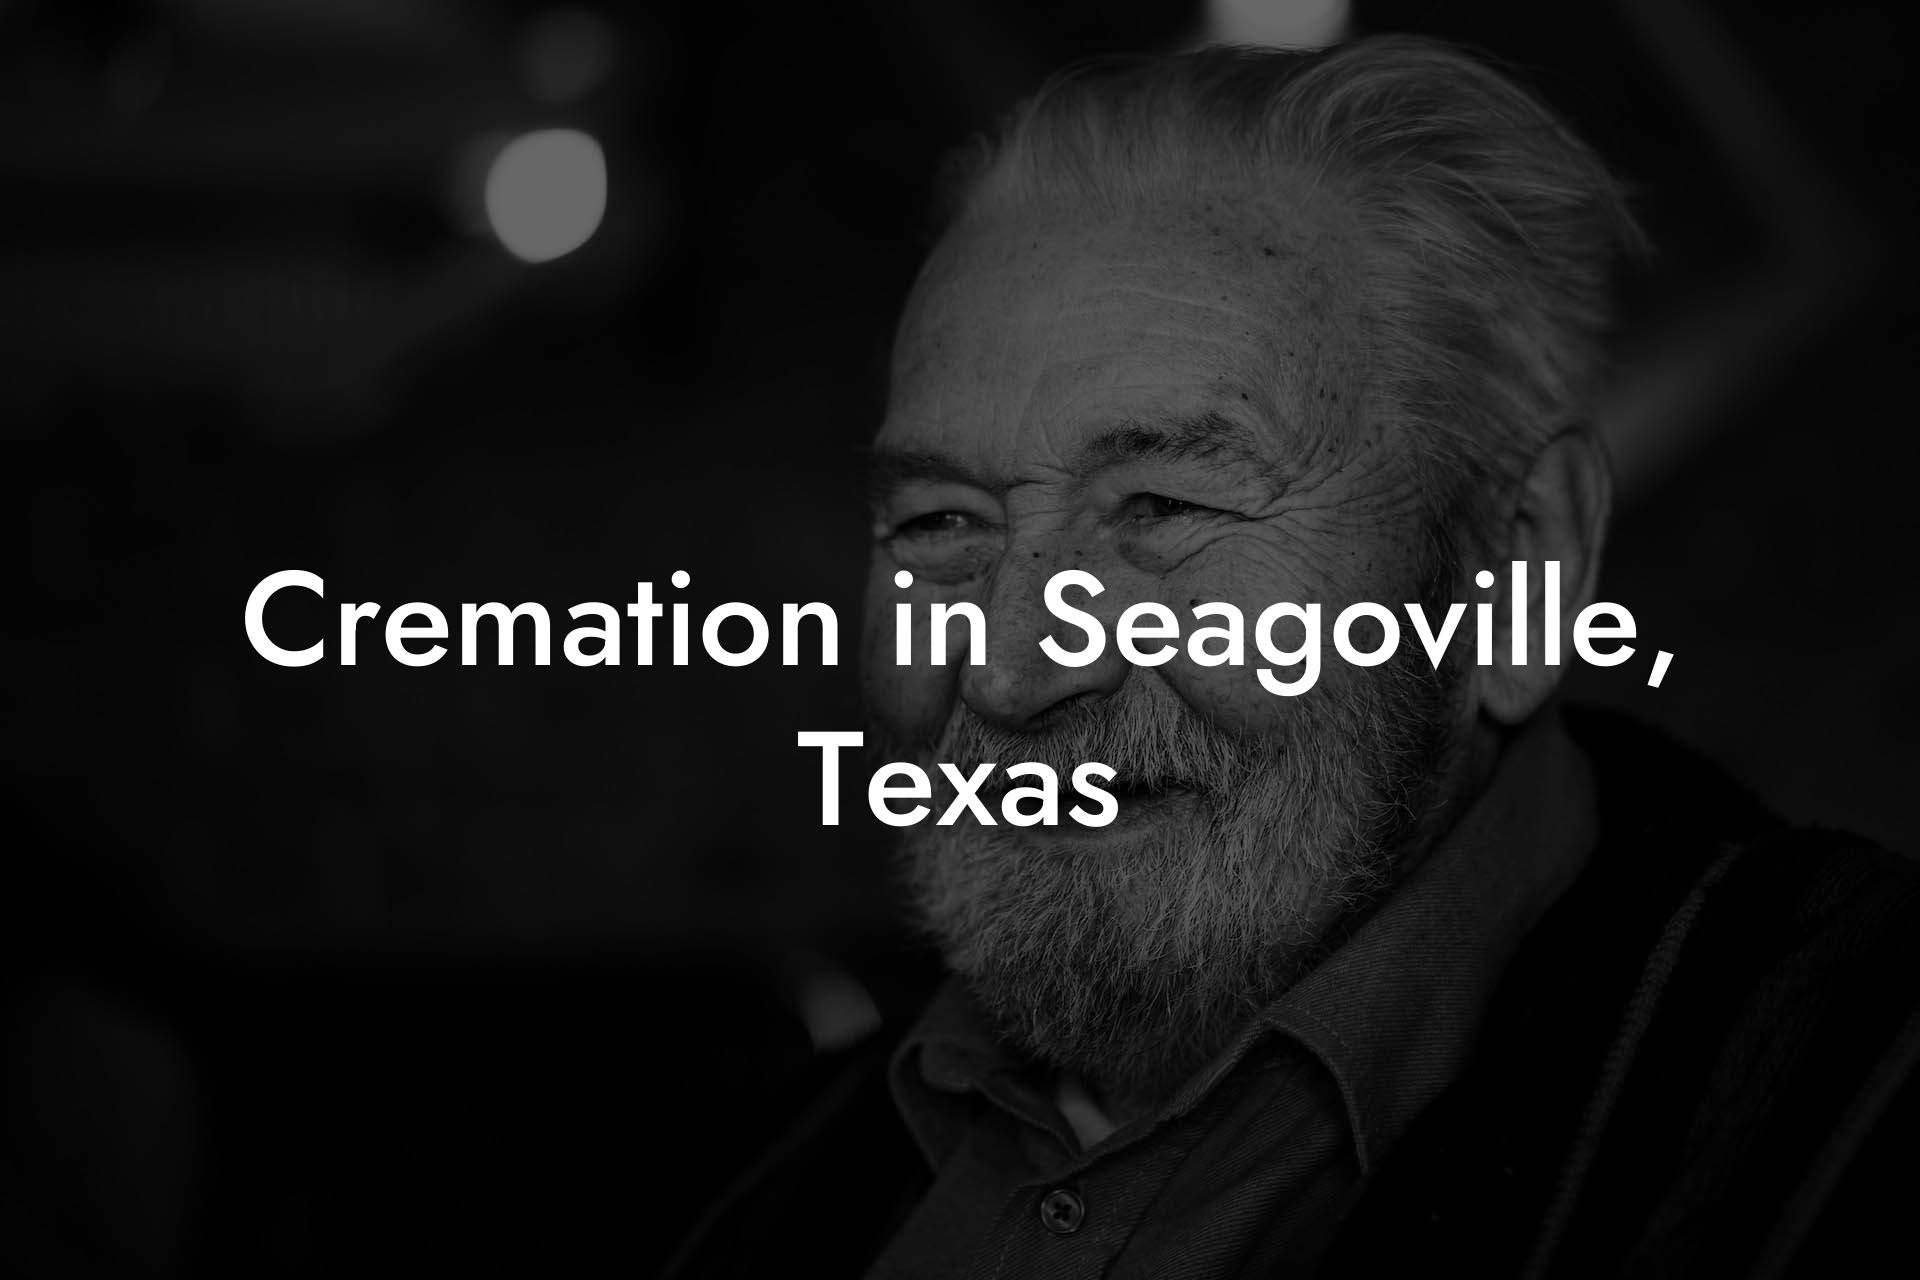 Cremation in Seagoville, Texas